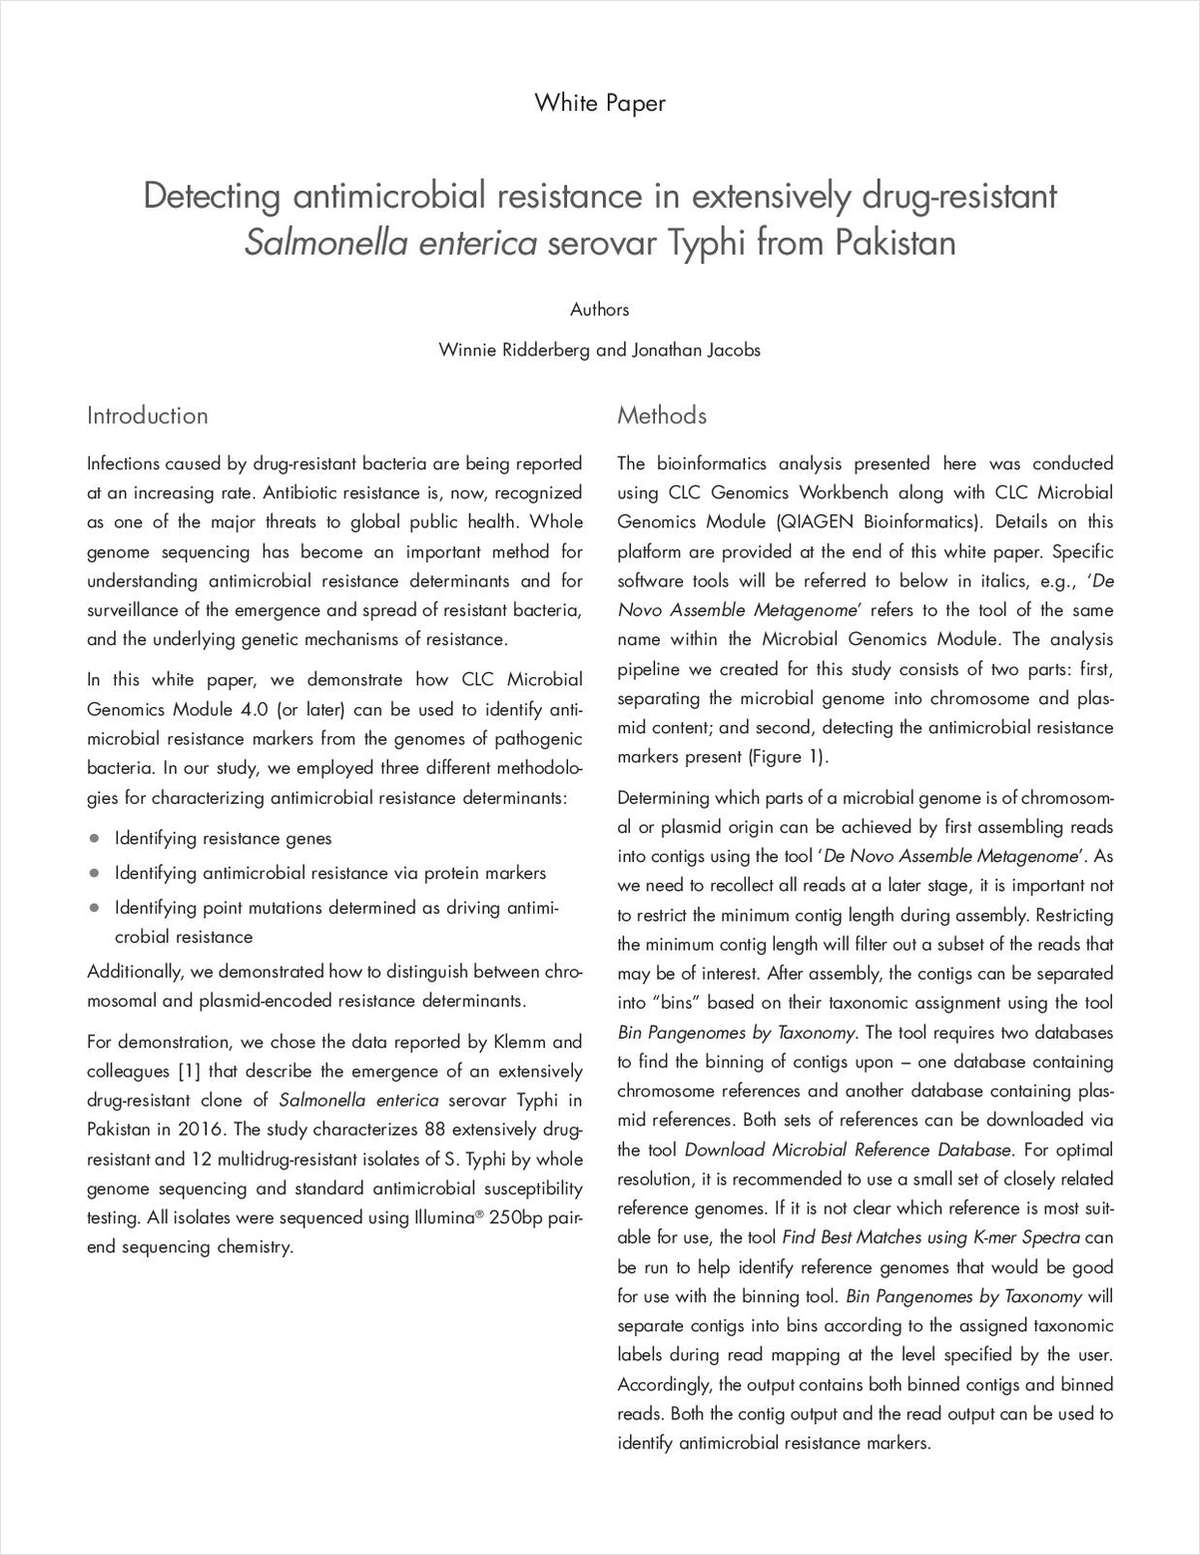 Detecting Antimicrobial Resistance in Extensively Drug-Resistant Salmonella enterica Serovar Typhi from Pakistan